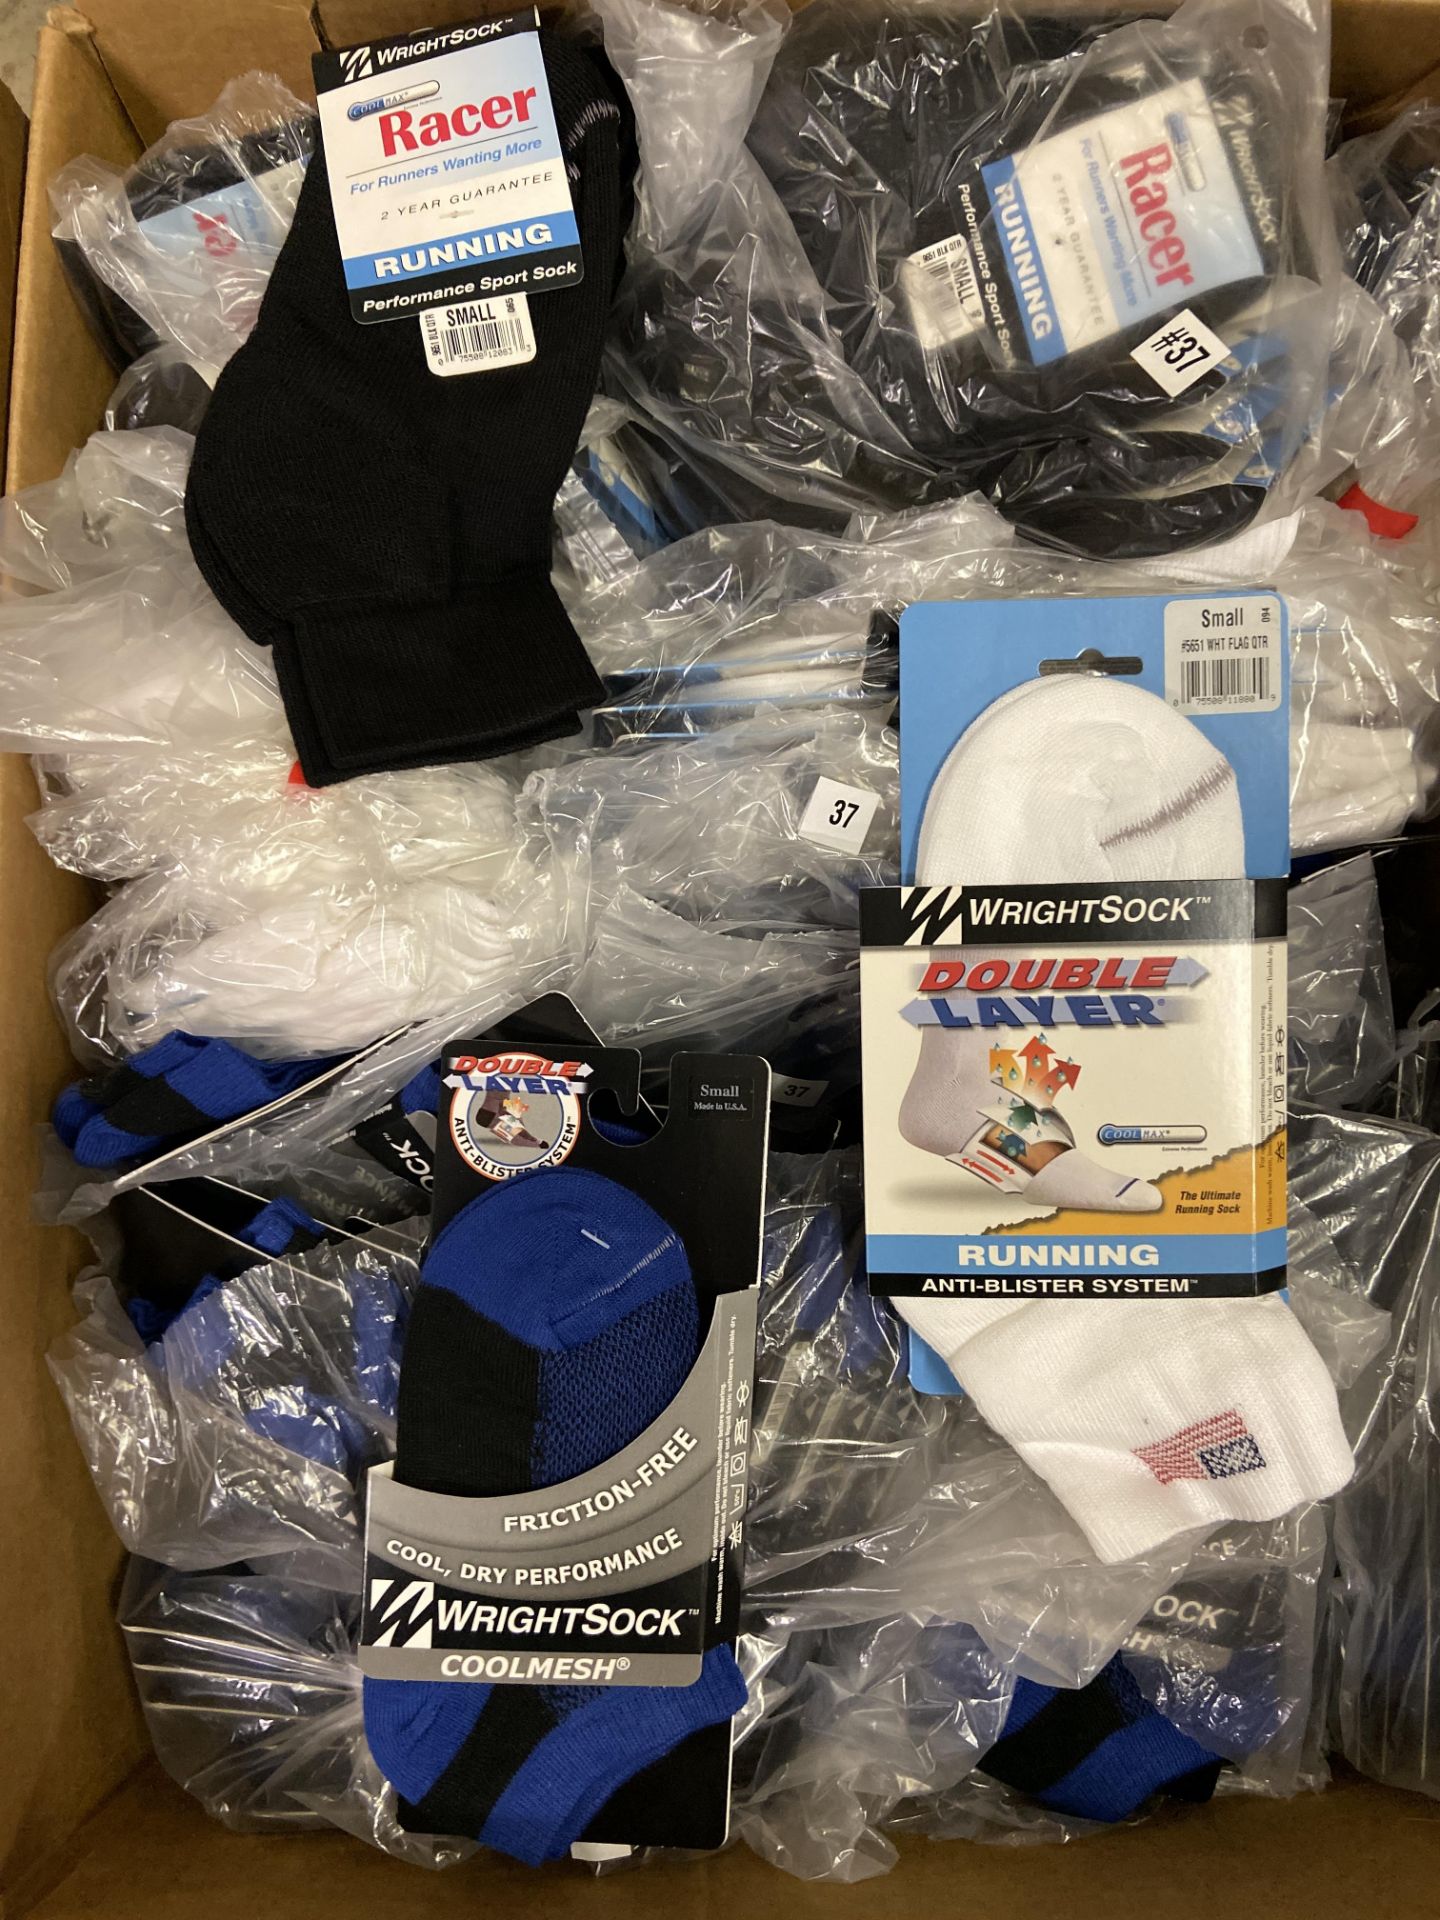 250+ packs of New Socks, Wrightsock Running and Coolmesh, Double Layer, Various Colors, USA Flag, - Image 2 of 3